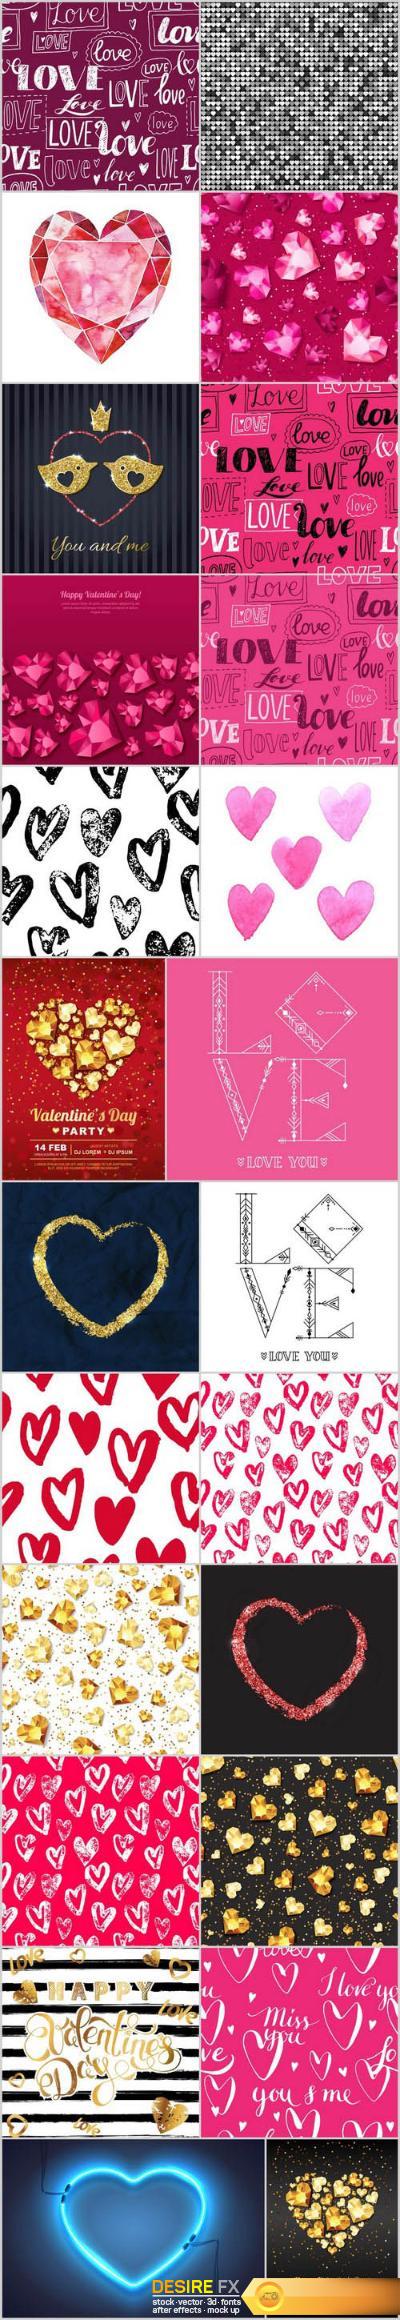 Heart & Love - Happy Valentines Day 2 - Set of 24xEPS Professional Vector Stock